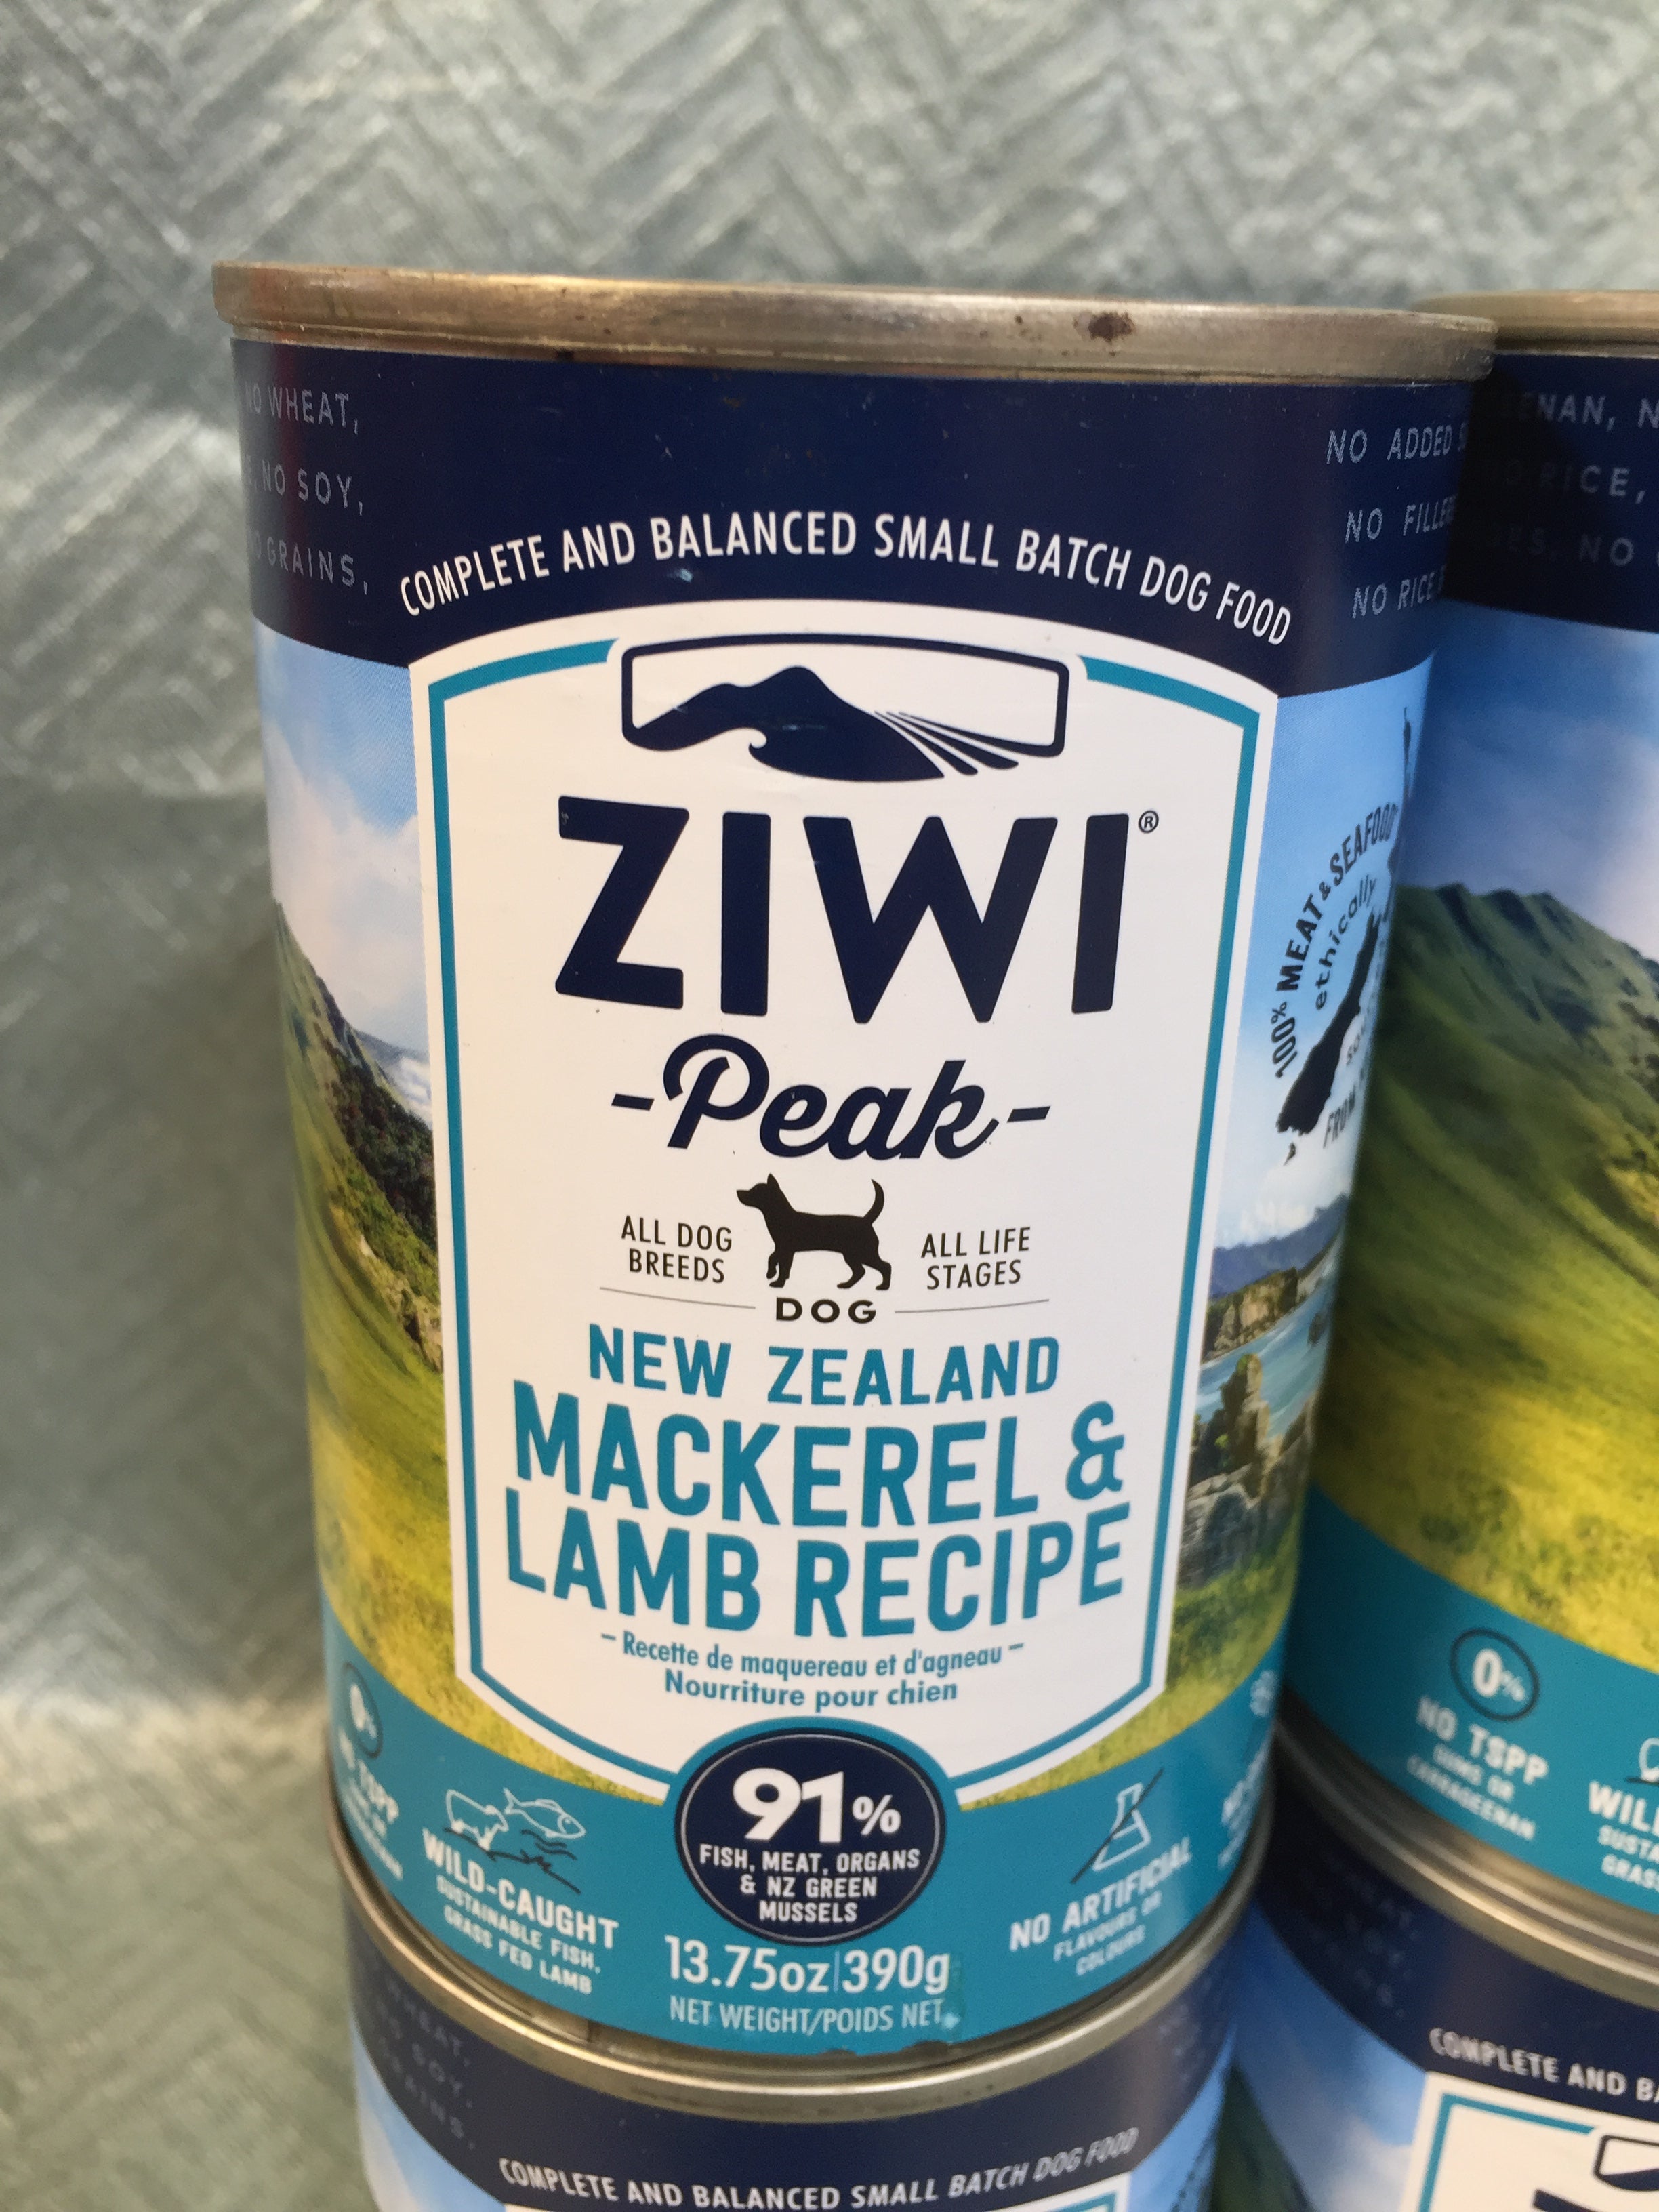 ZIWI Peak Canned Wet Dog Food – Mackerel & Lamb - 12 Pack of Cans (7555196682478)